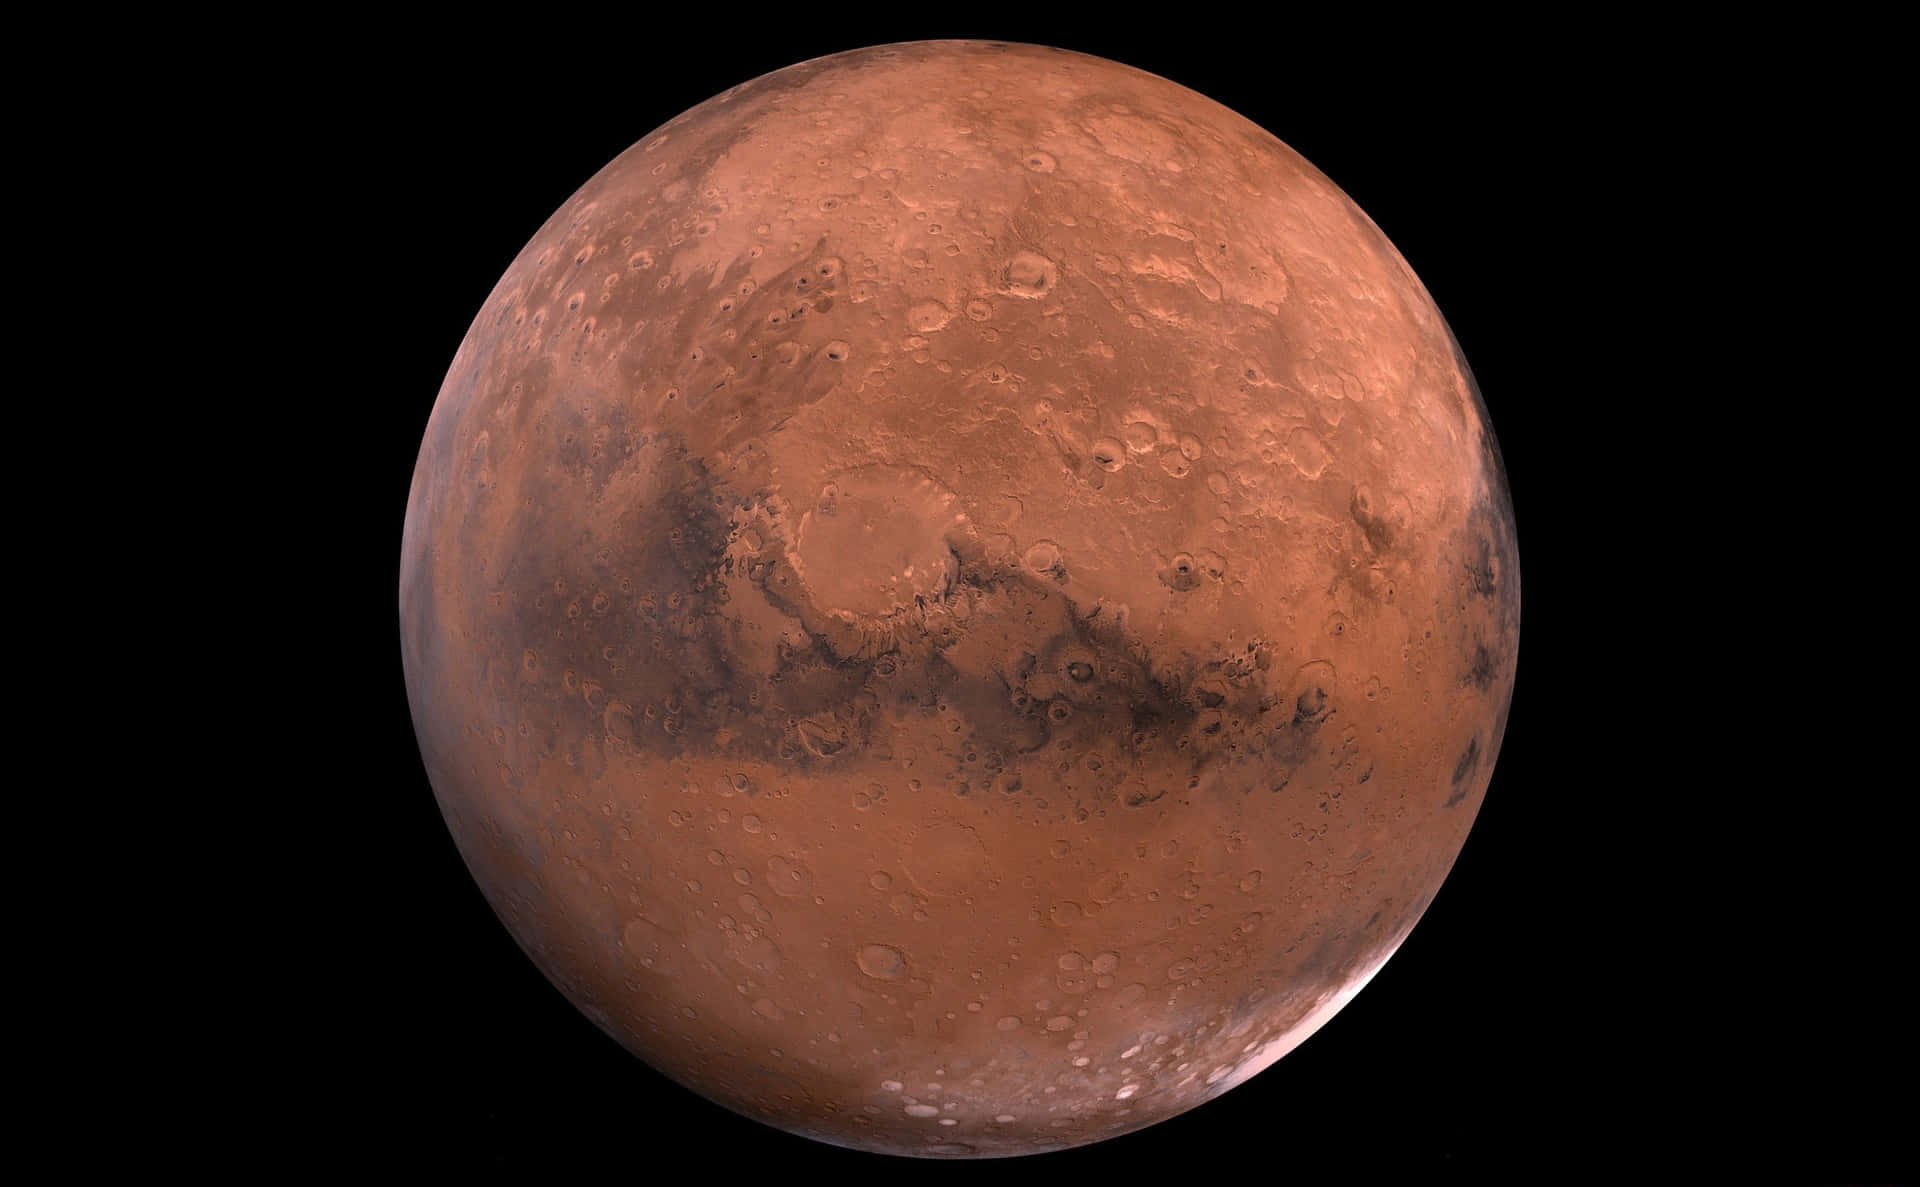 A view of the red planet Mars in space